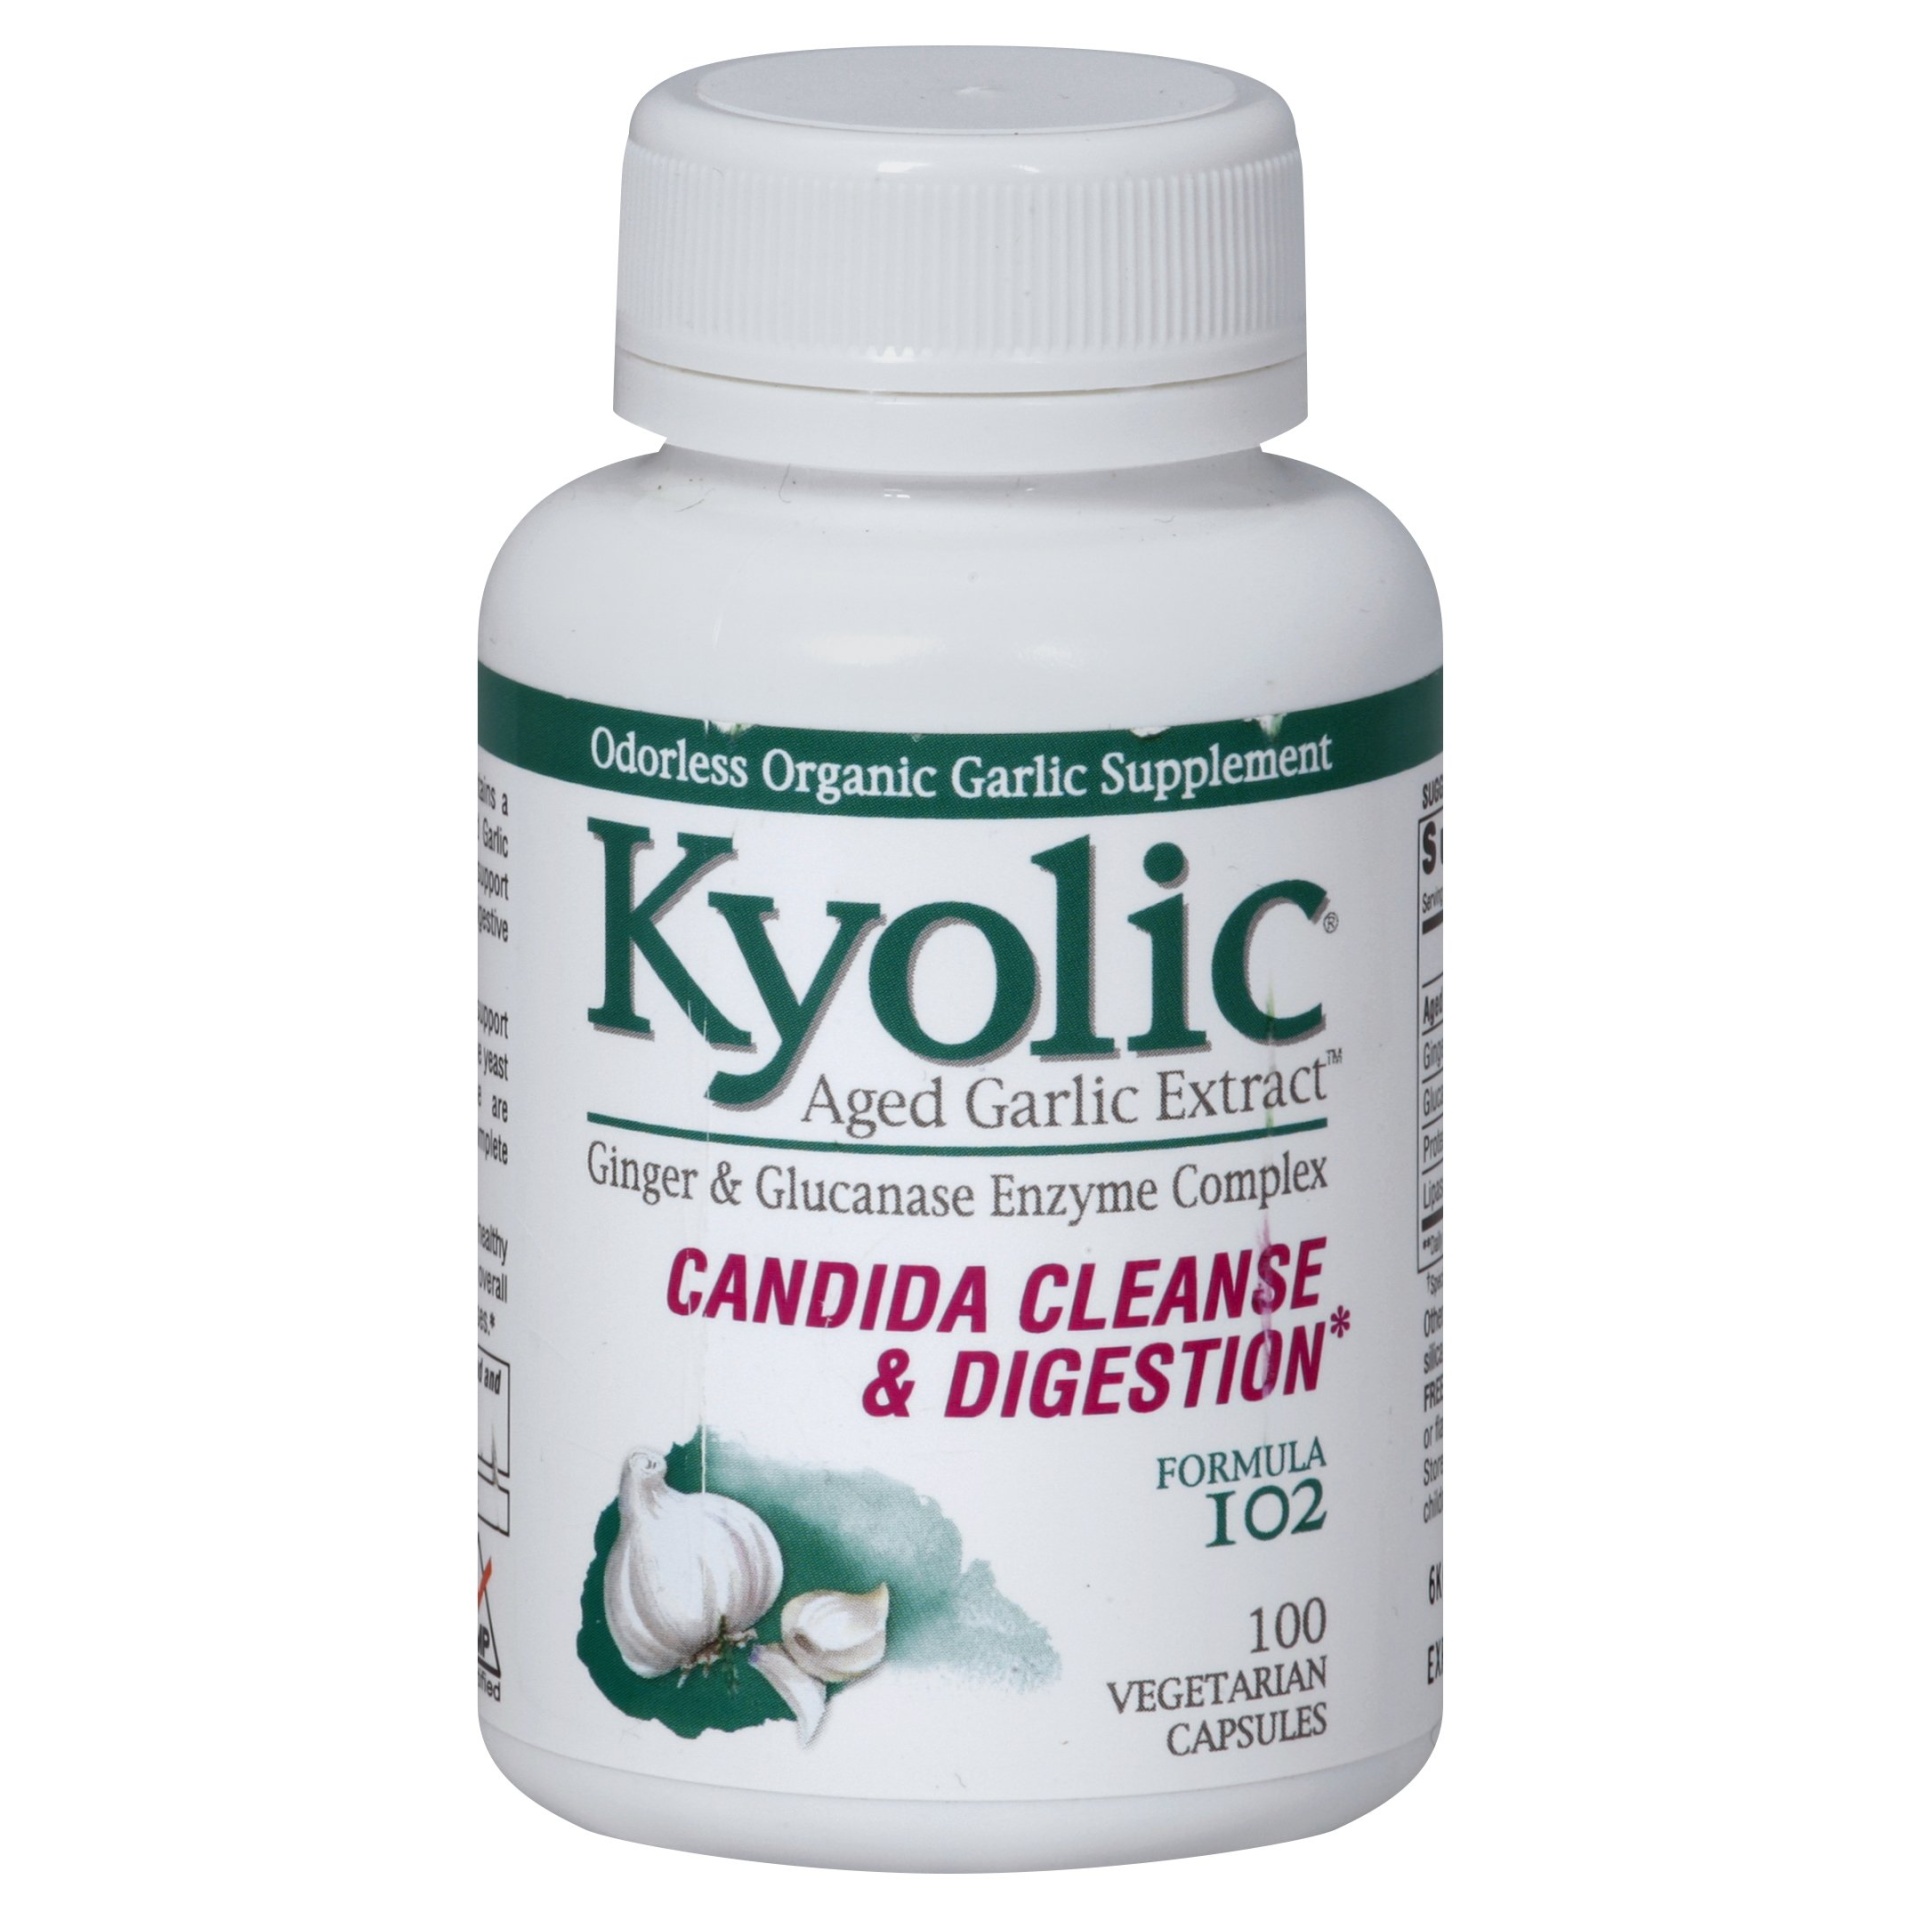 slide 1 of 1, Kyolic Odorless Organic Aged Garlic Extract Candida Cleanse And Digestion Formula 102 Vegetarian Capsules, 100 ct